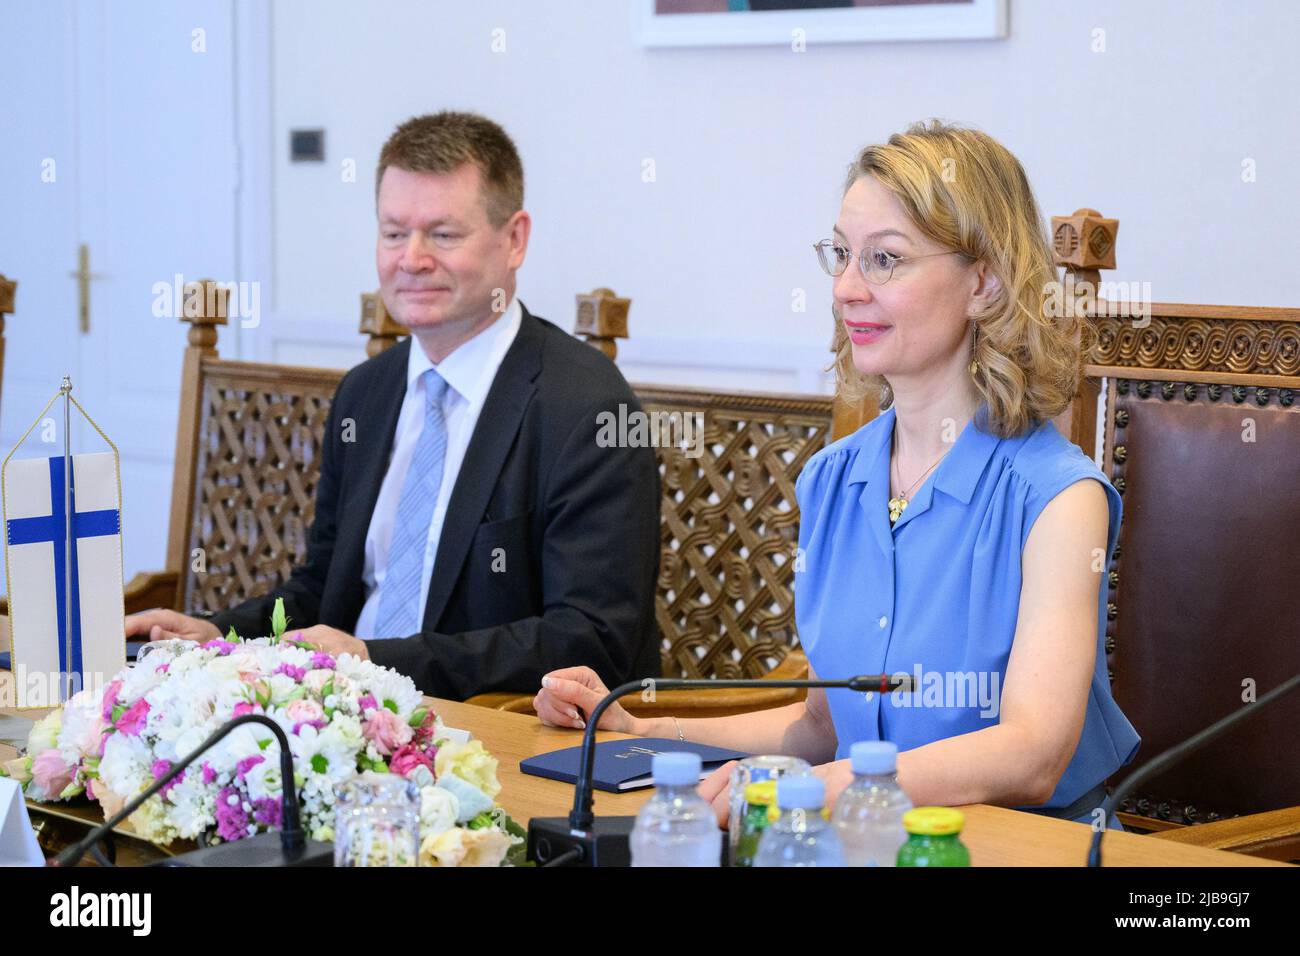 Zagreb, Croatia. 04th June, 2022. Finnish minister Tytti Tuppurainen met for discussions with Croatian State Secretary for Europe Andreja Metelko-Zgombic and Chair of the European Affairs Committee of the Croatian Parliament Domagoj Hajdukovic in Zagreb on June 4, 2022. Topics on the agenda during the visit included the war launched by Russia and assistance to Ukraine, EU enlargement prospects in the Western Balkans, Finland’s NATO membership process, and Croatia’s accession to the Schengen area and adoption of the euro. Photo: Davor Puklavec/PIXSELL Credit: Sandra Krunic/Alamy Live News Stock Photo